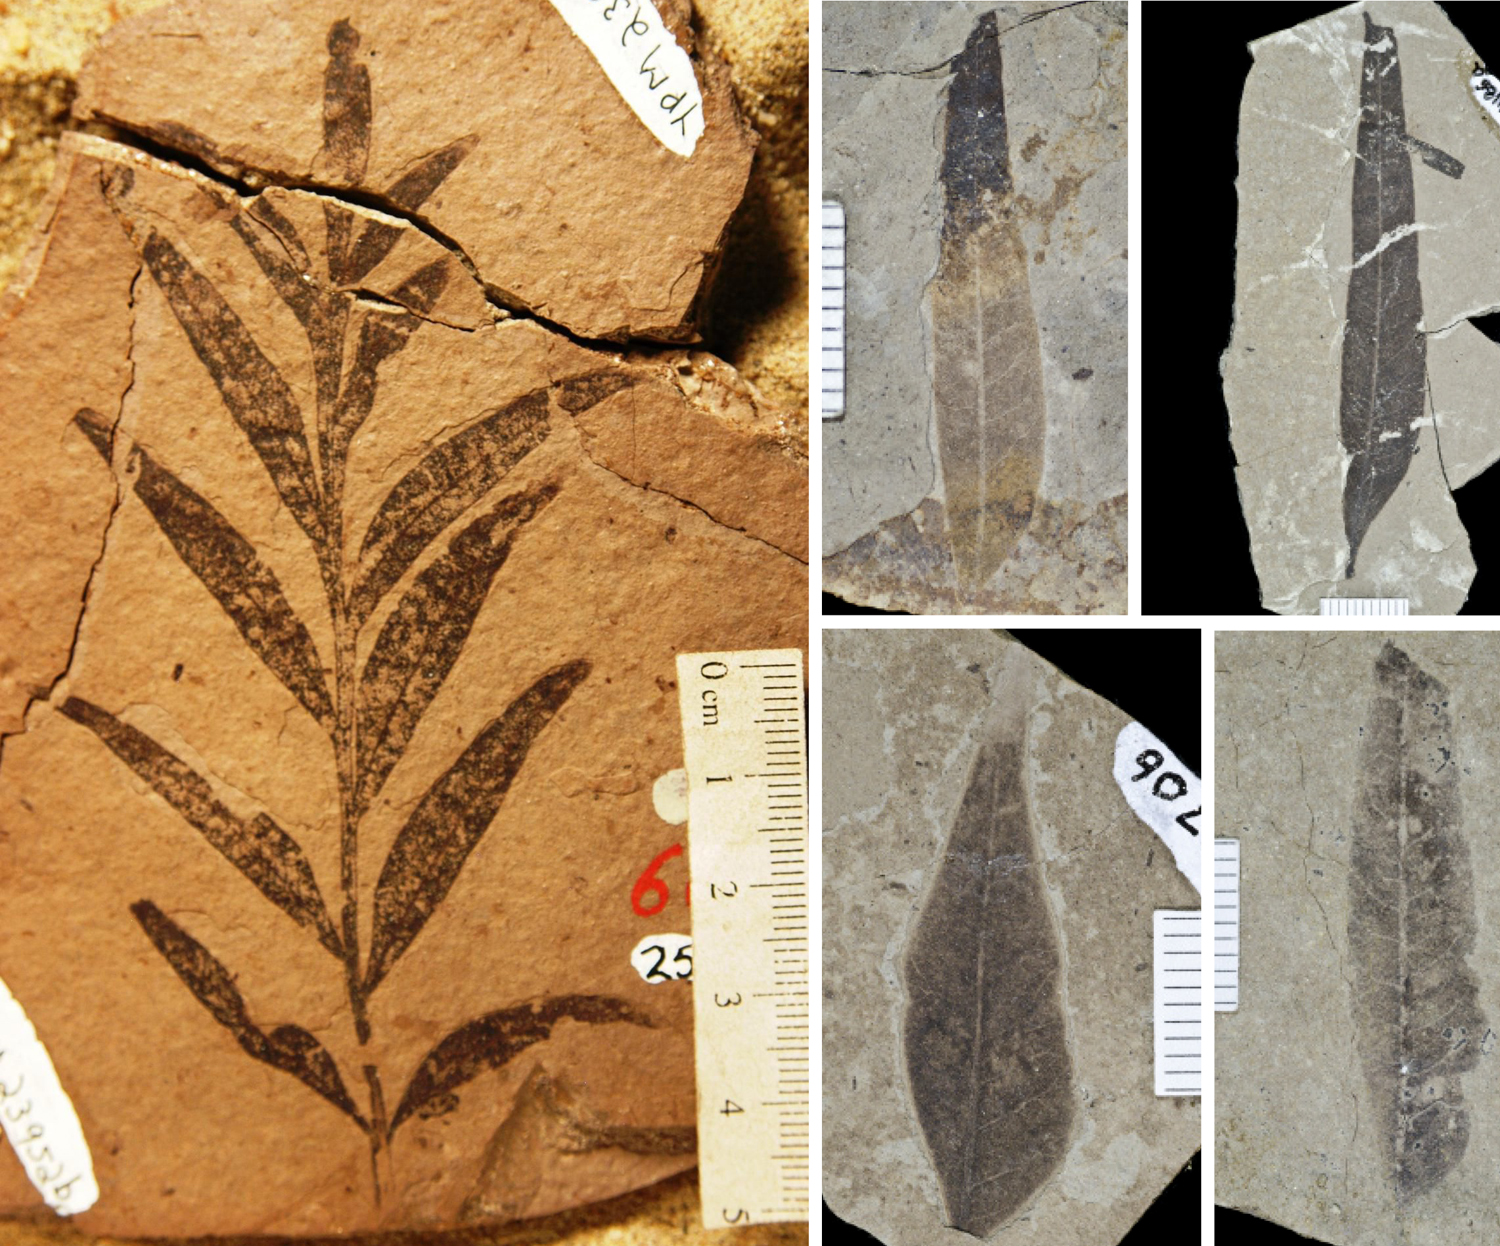 2-Panel photographic figure showing fossil sumac leaves. Panel 1: Pinnately compound leaf. Panel 2: Images of four isolated leaflets.